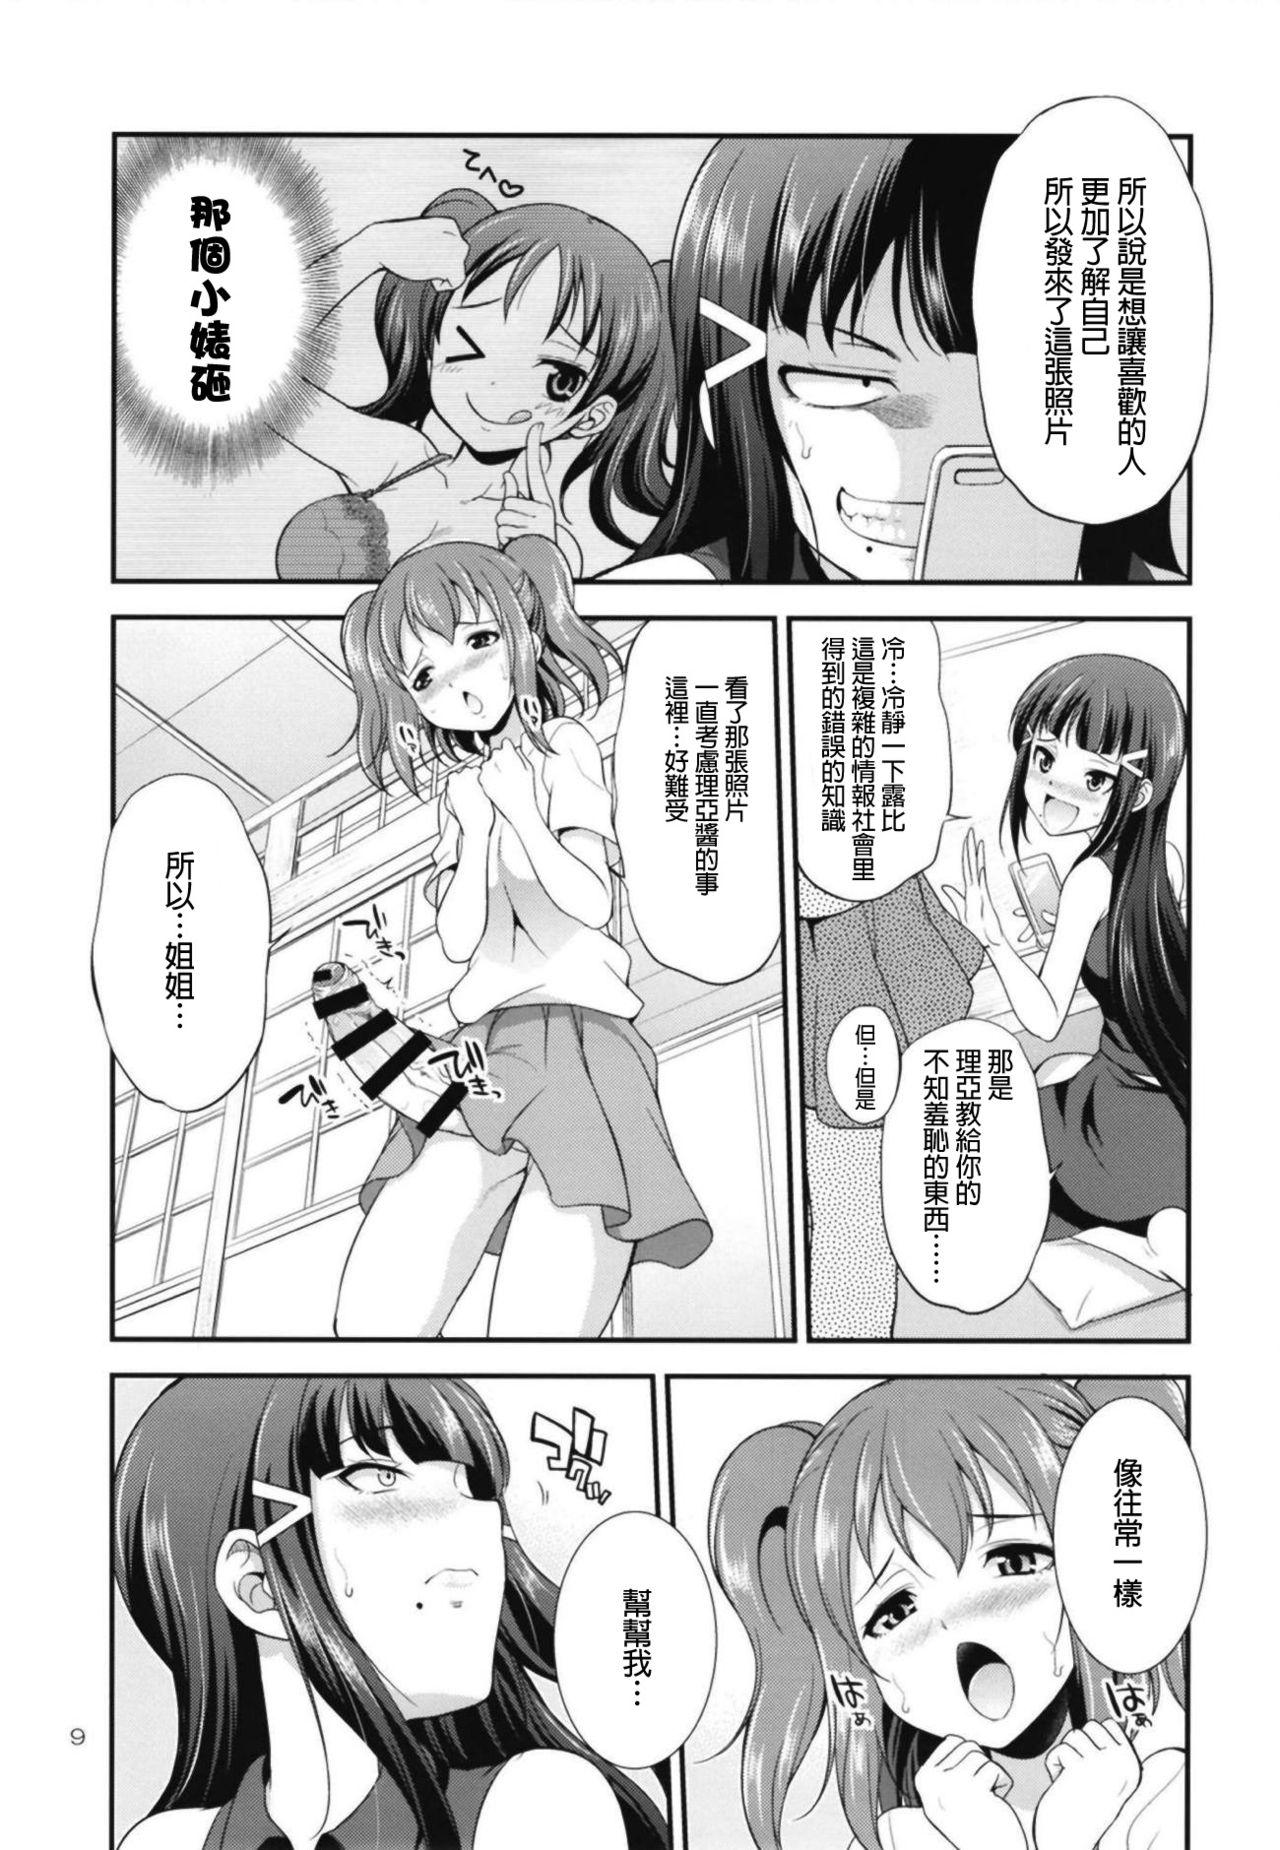 Gay Hairy FUTAqours side-dia&ruby - Love live sunshine Amature Allure - Page 9